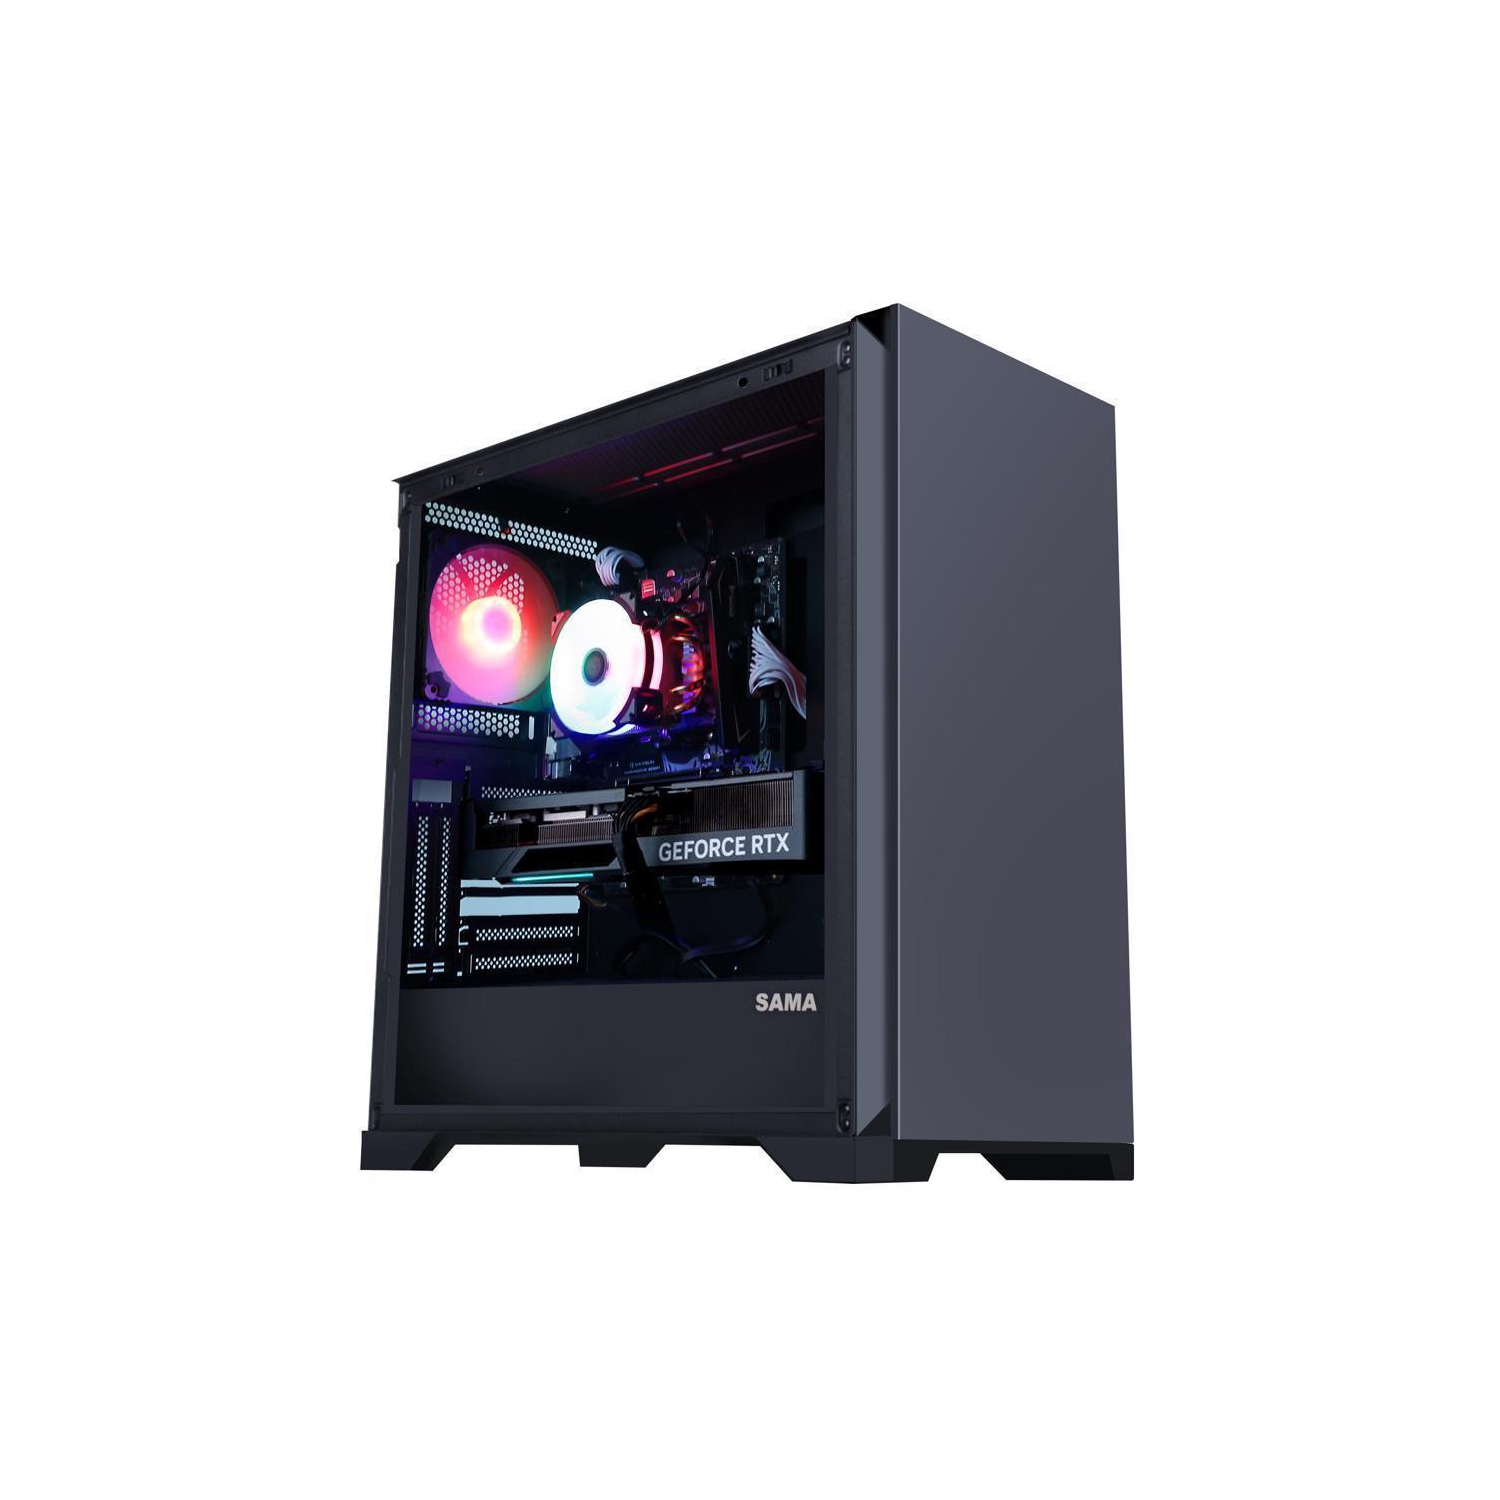 Hoengager Ares Gaming - Intel Core i5-12600K 10-Core 3.7GHz-NVIDIA GeForce RTX 3060 Ti- 16GB DDR4 3200MHz -500GB M.2 + 1TB 2.5'' SATA SSD- WIFI -RGB Fans - Windows 11 Pro Computer